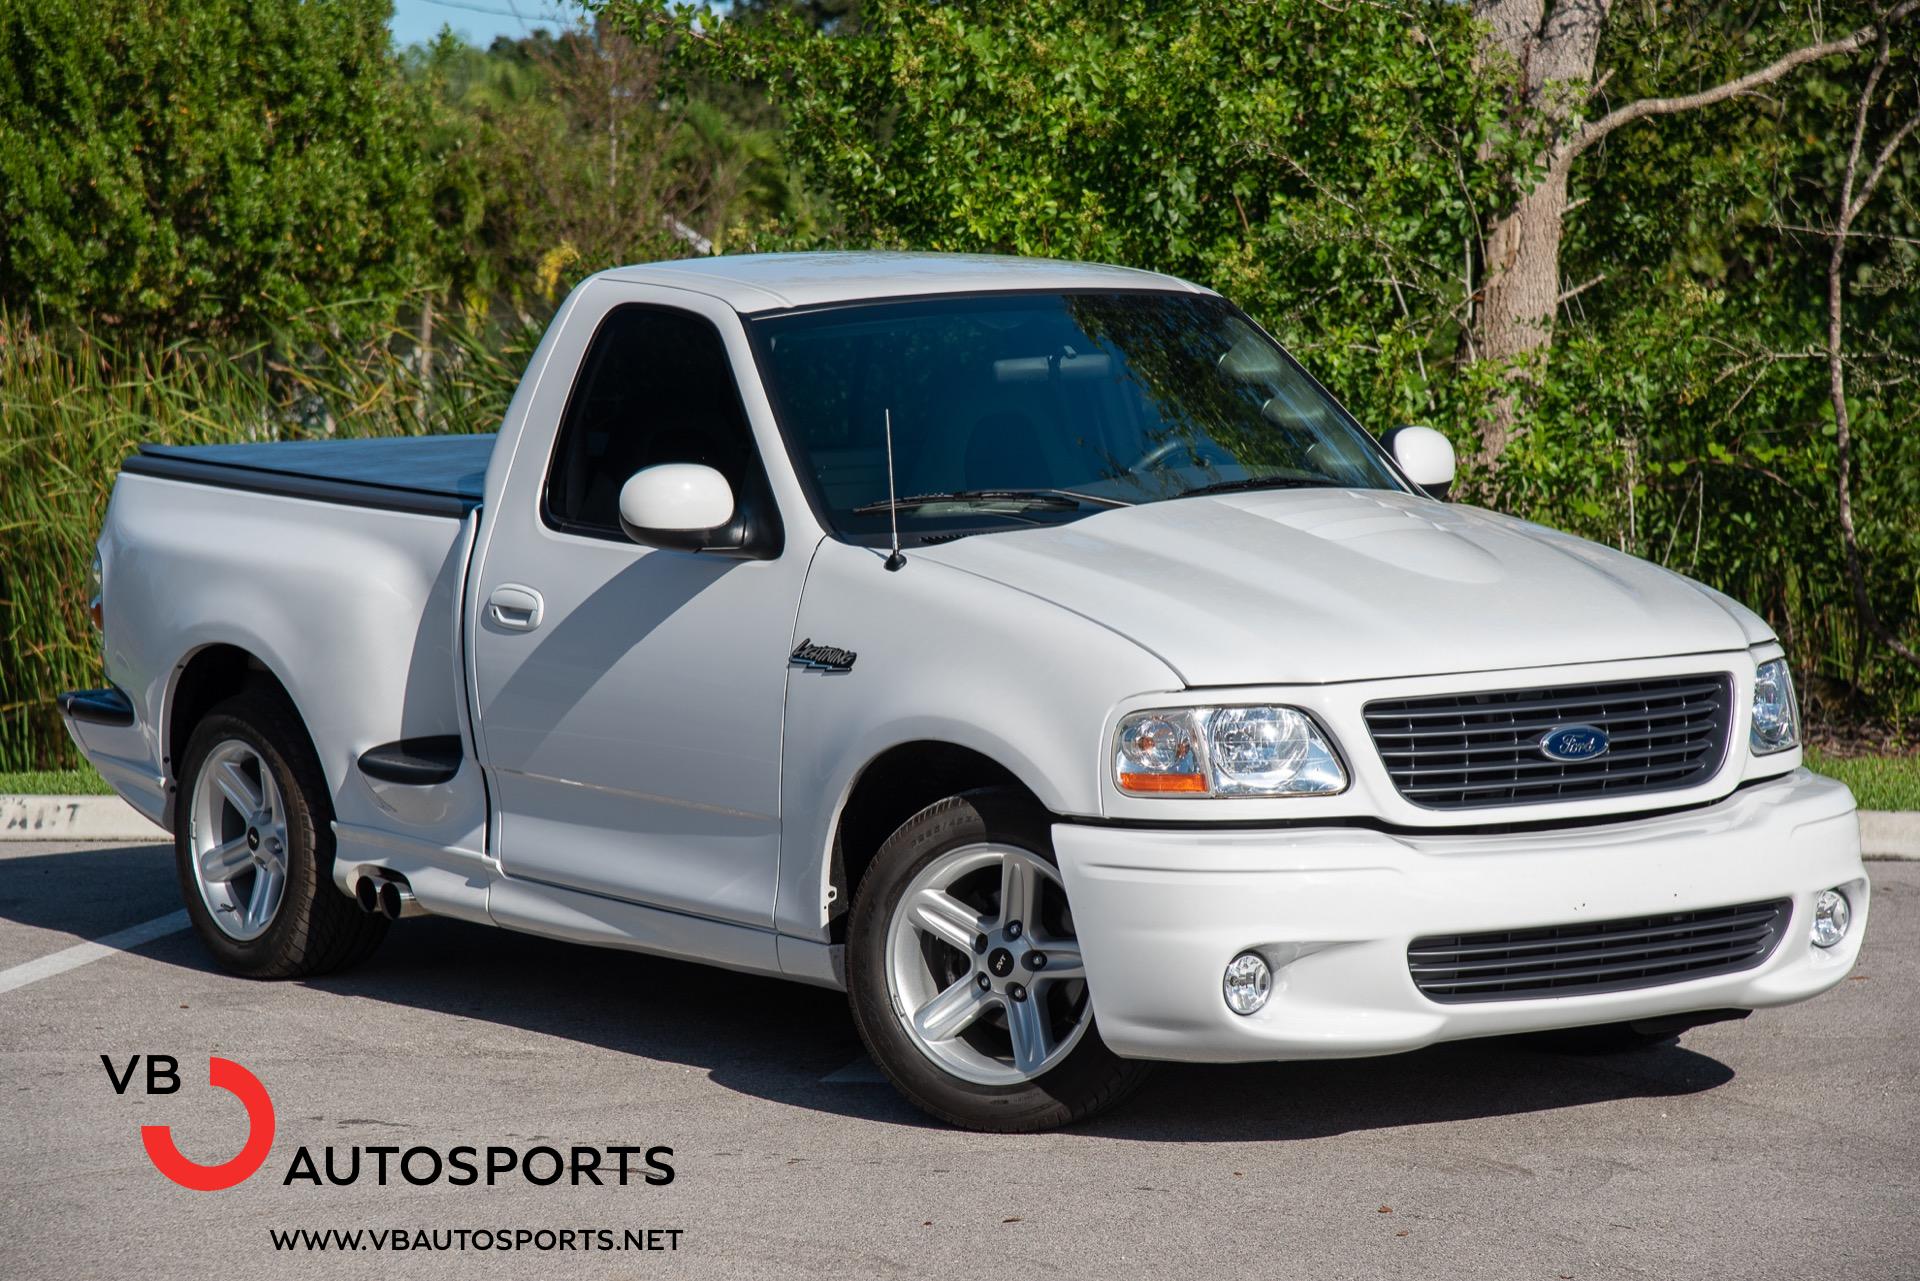 Pre-Owned 2003 Ford F-150 SVT Lightning For Sale (Sold) | VB Autosports  Stock #VBC013